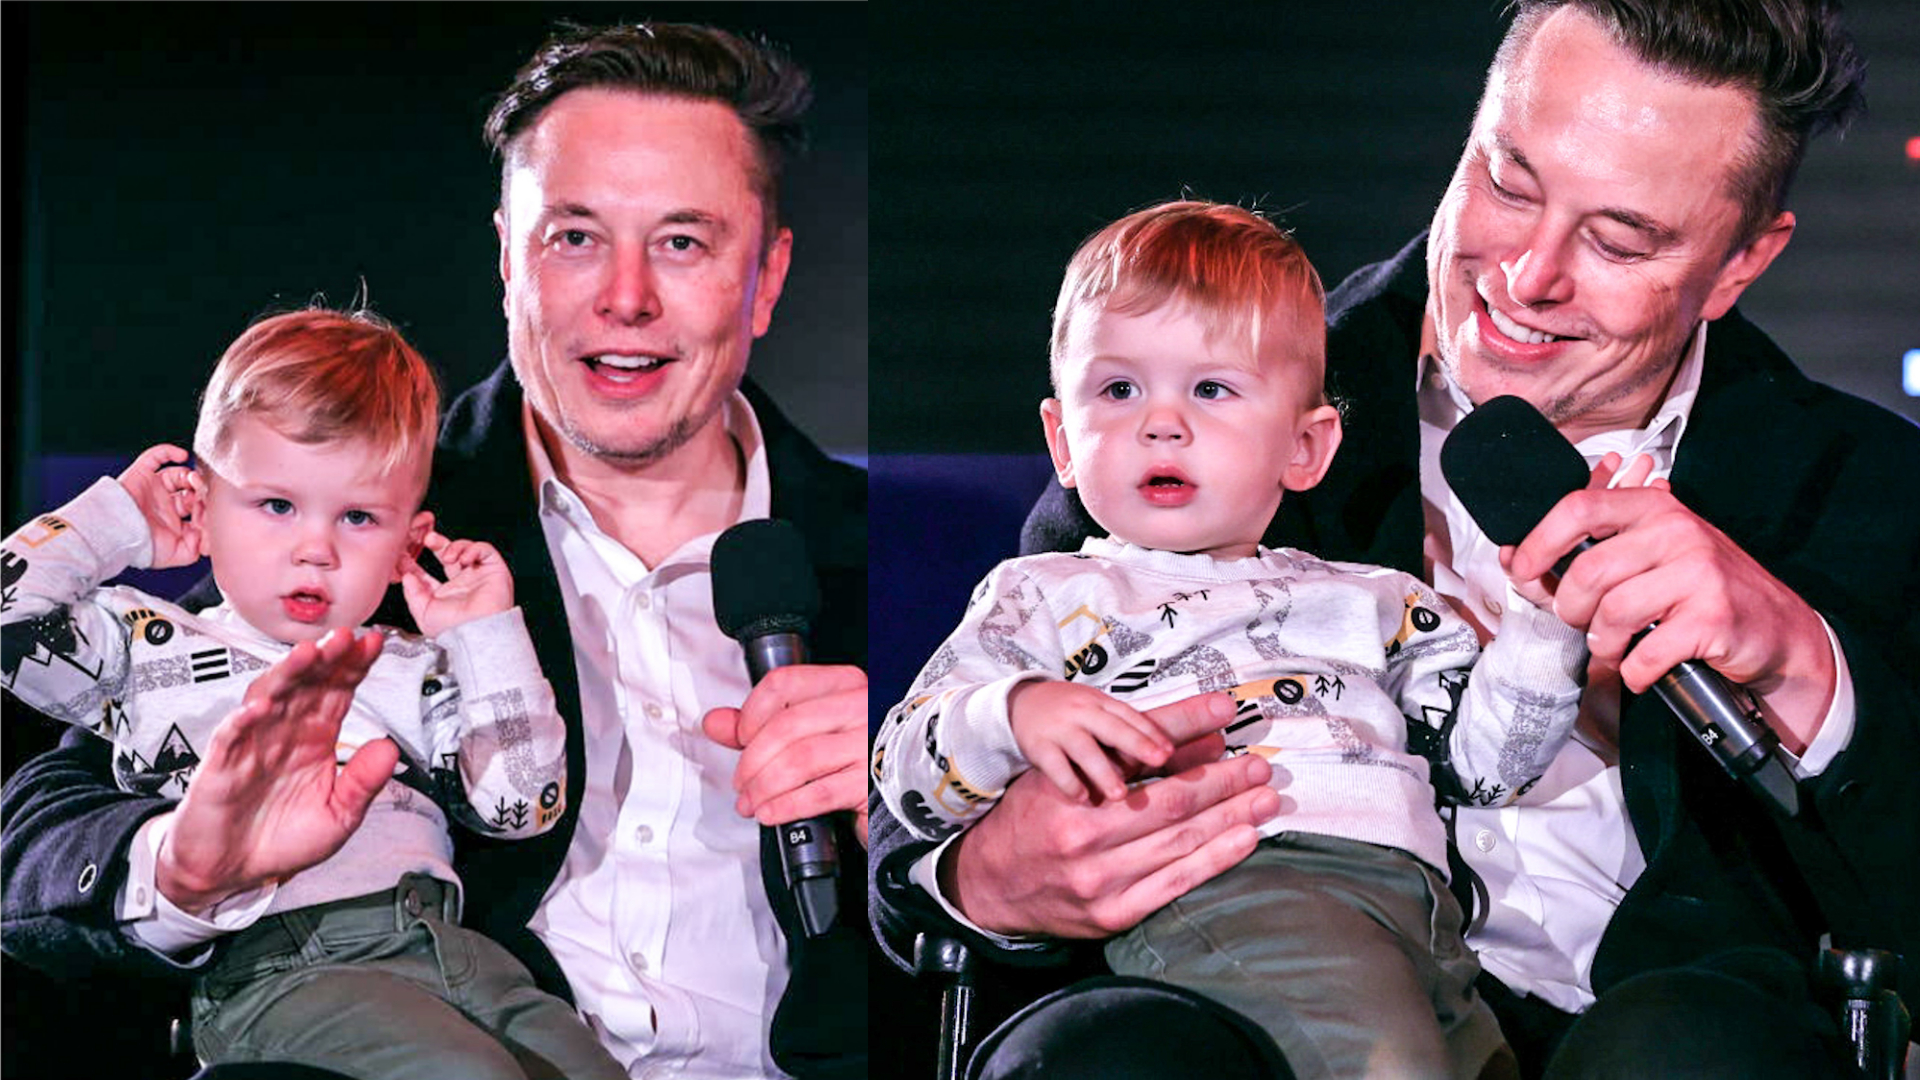 Elon Musk's Son X Has His Own Badge During Visit to Twitter's Offices in San Francisco